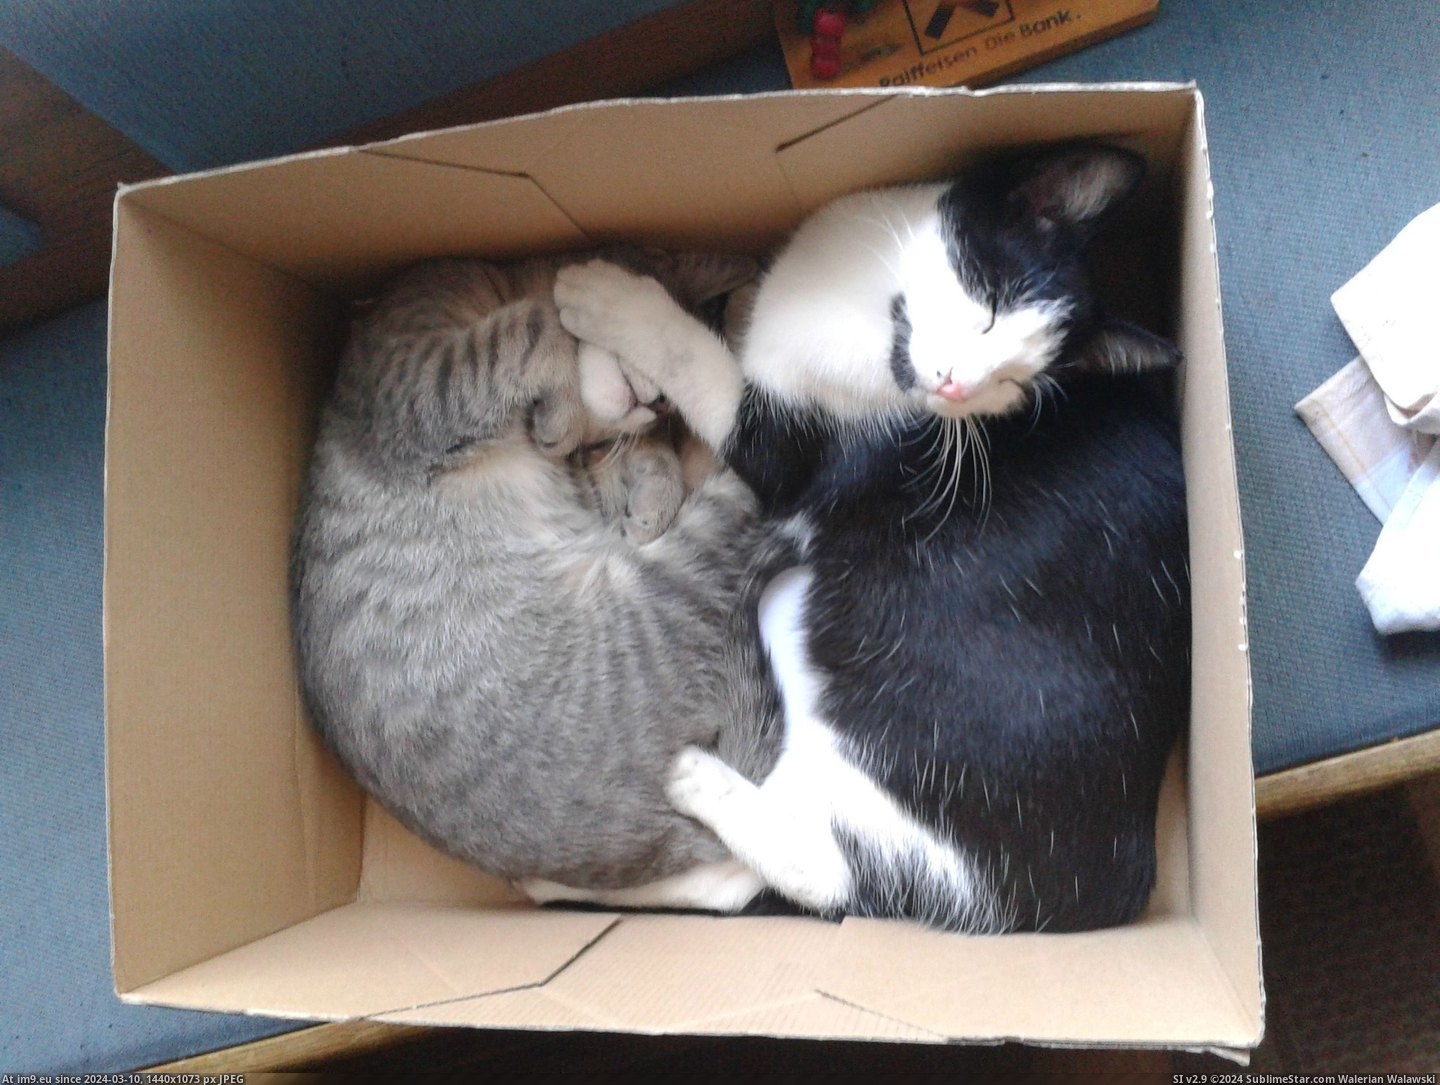 #Cats #Old #Two #Did #Grow #Quickly #Finding #Months #Weeks #Kittens #Few [Cats] A few months back I did a post about finding 2 two-weeks-old kittens. They grow so quickly 4 Pic. (Bild von album My r/CATS favs))